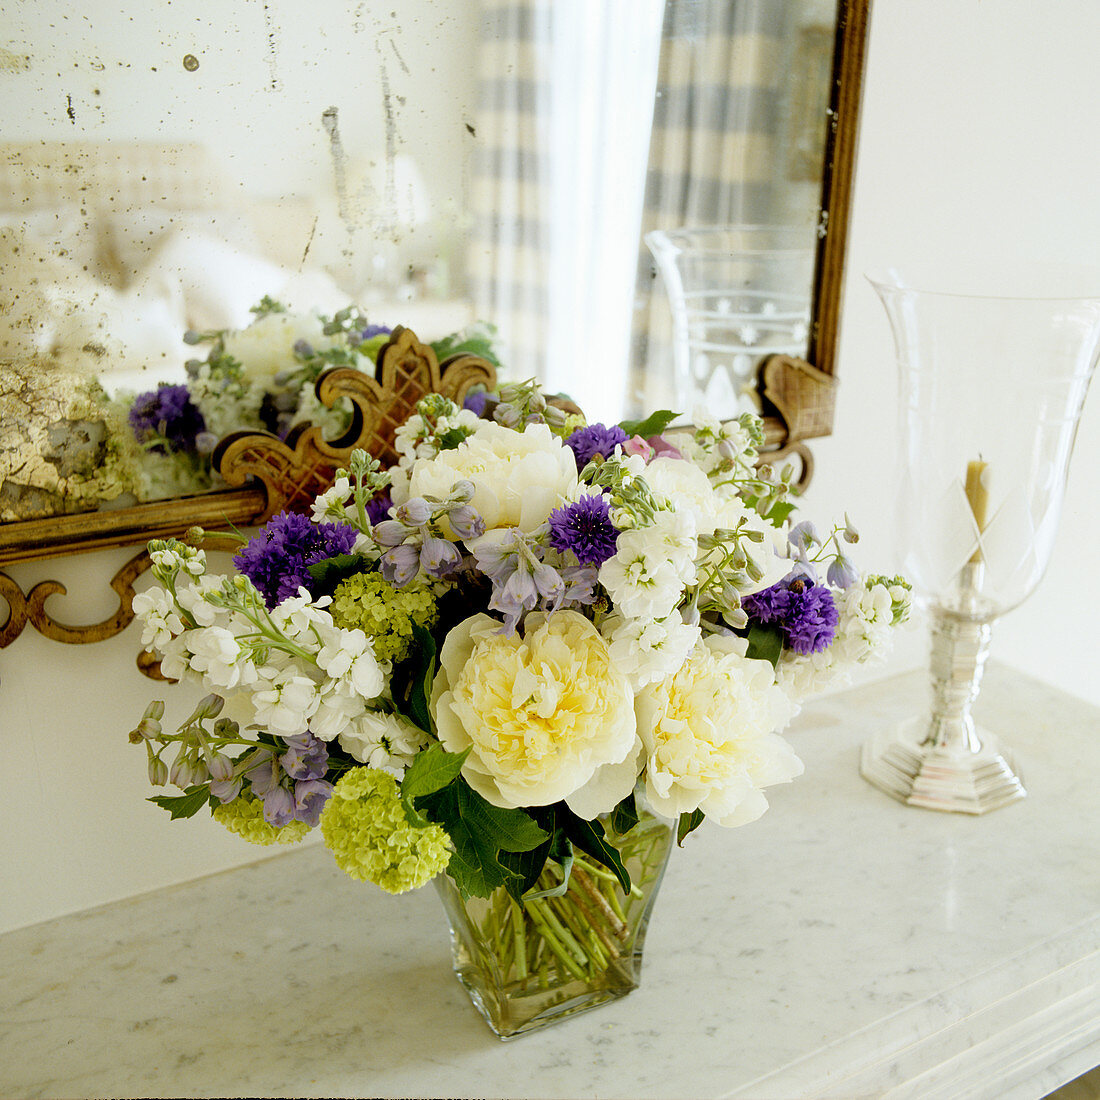 Bouquet on marble shelf in front of mirror with dull spots